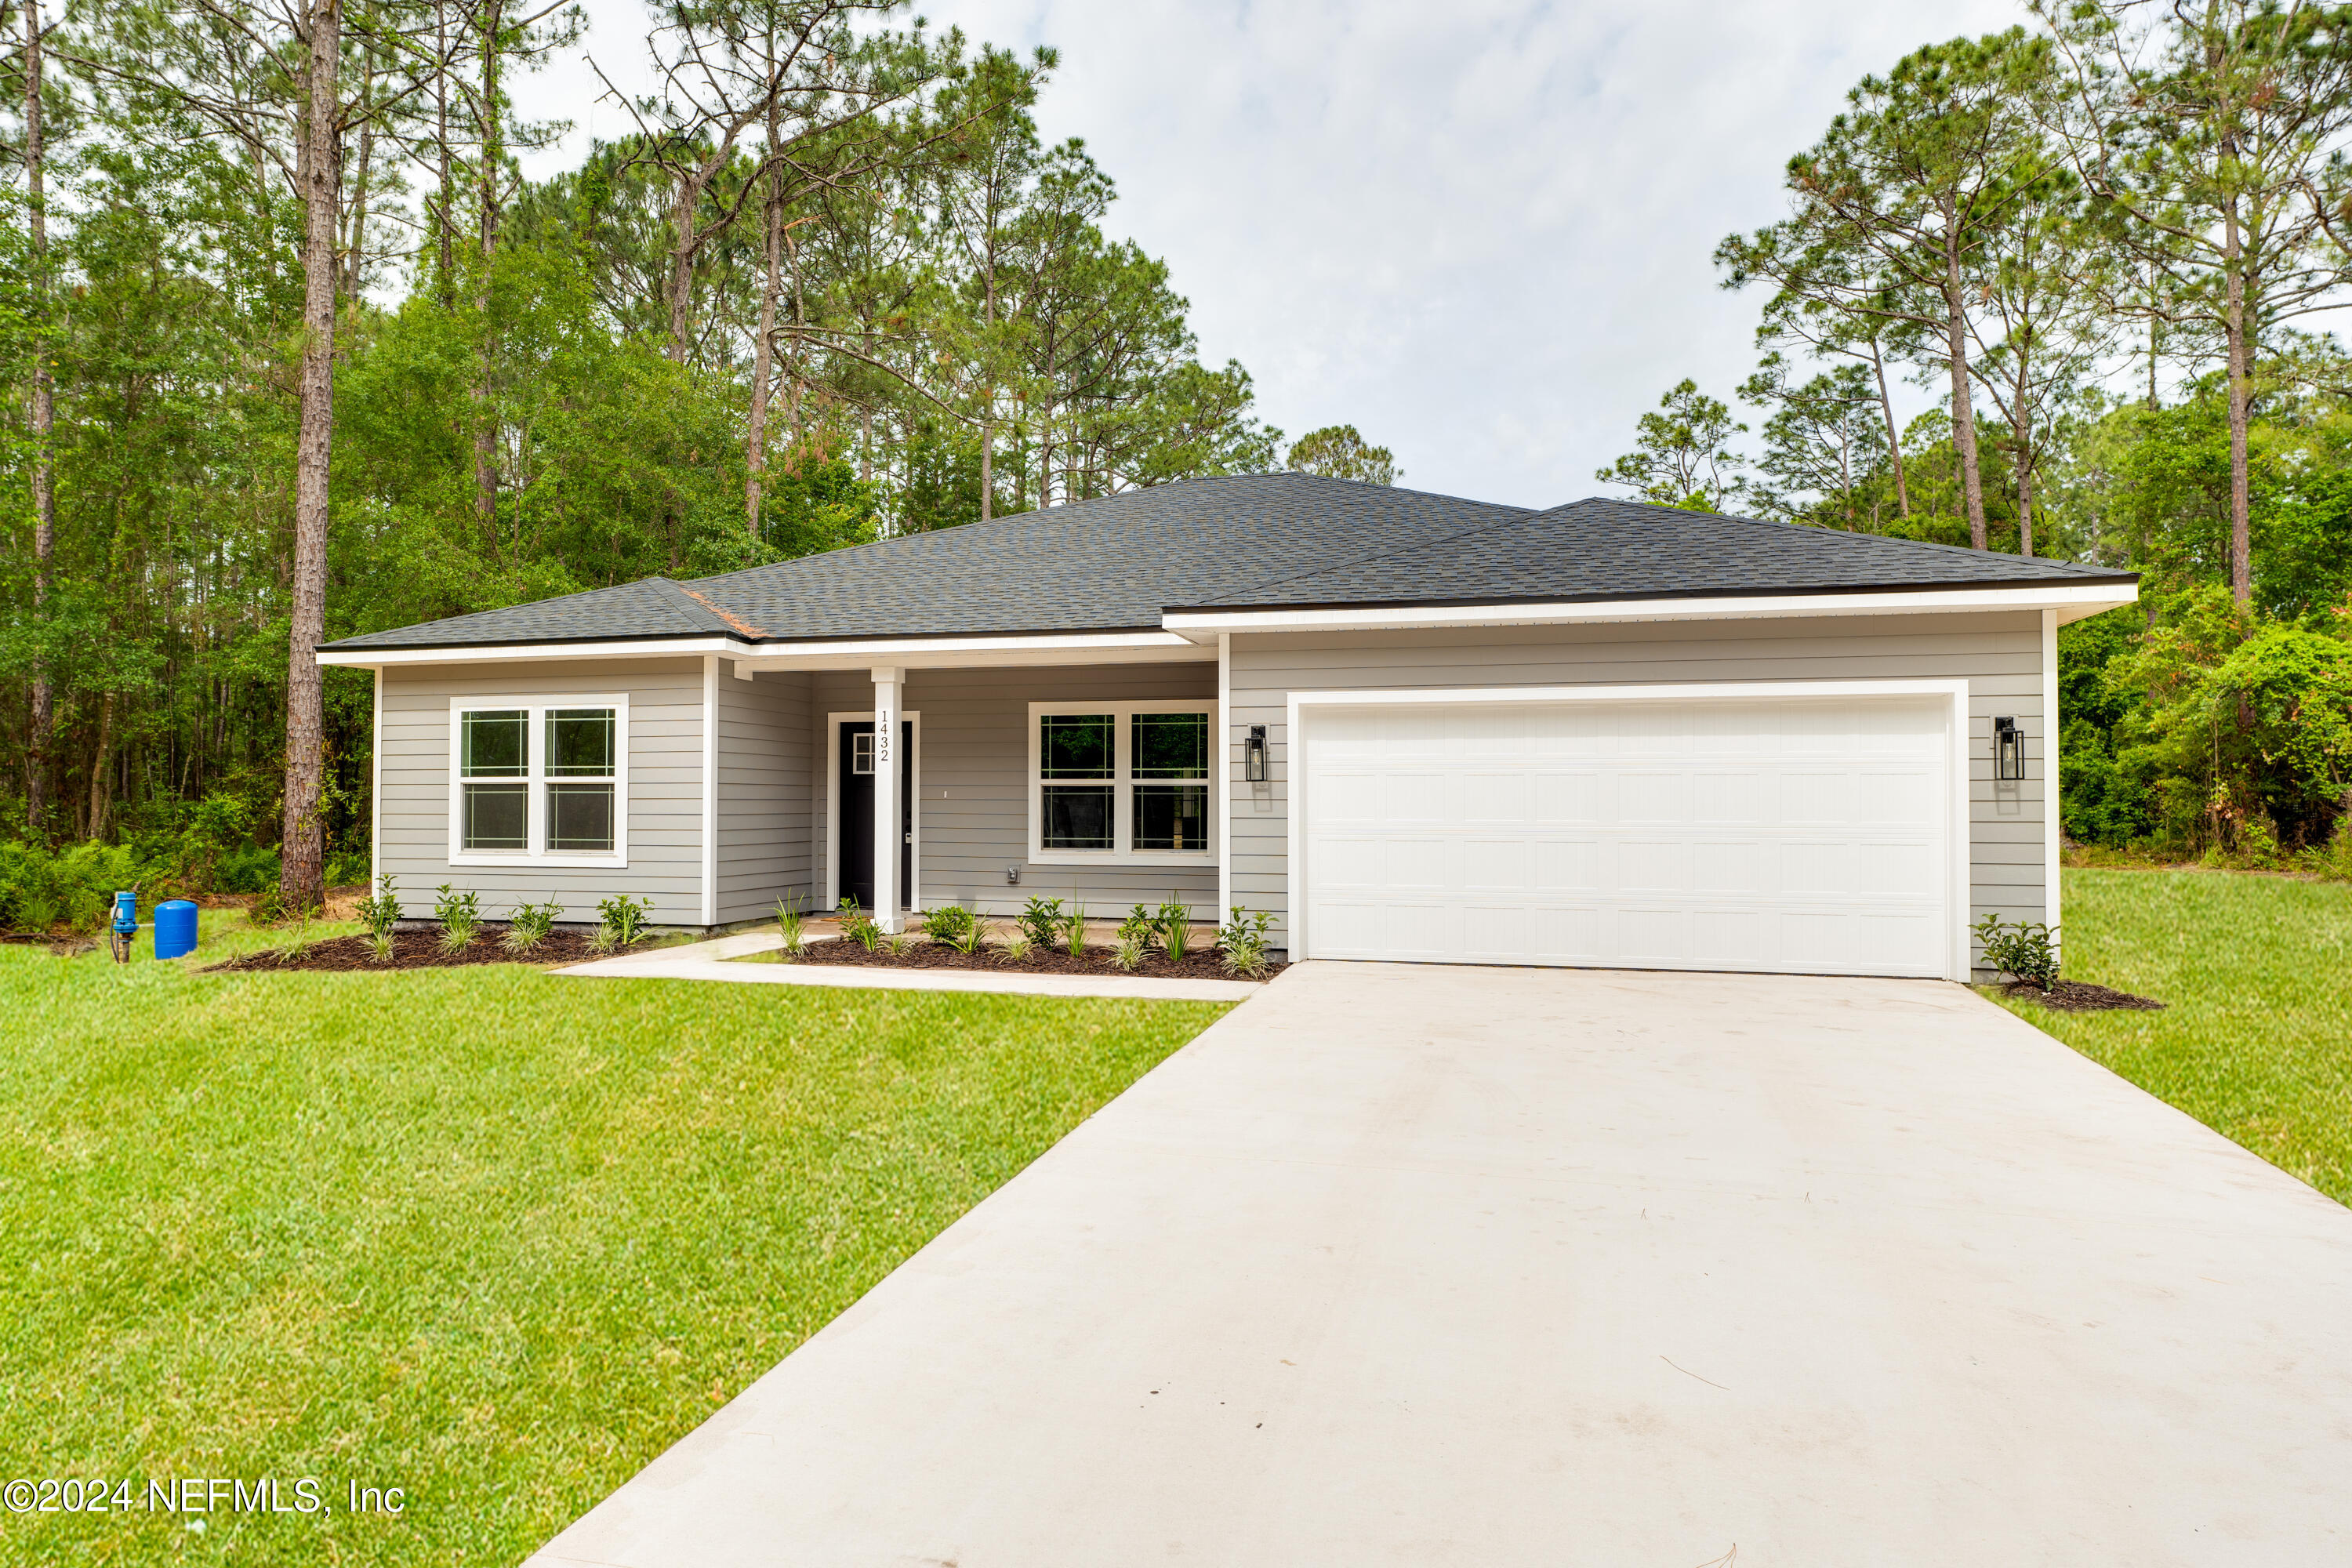 Middleburg, FL home for sale located at 1432 Wolf Trail, Middleburg, FL 32068